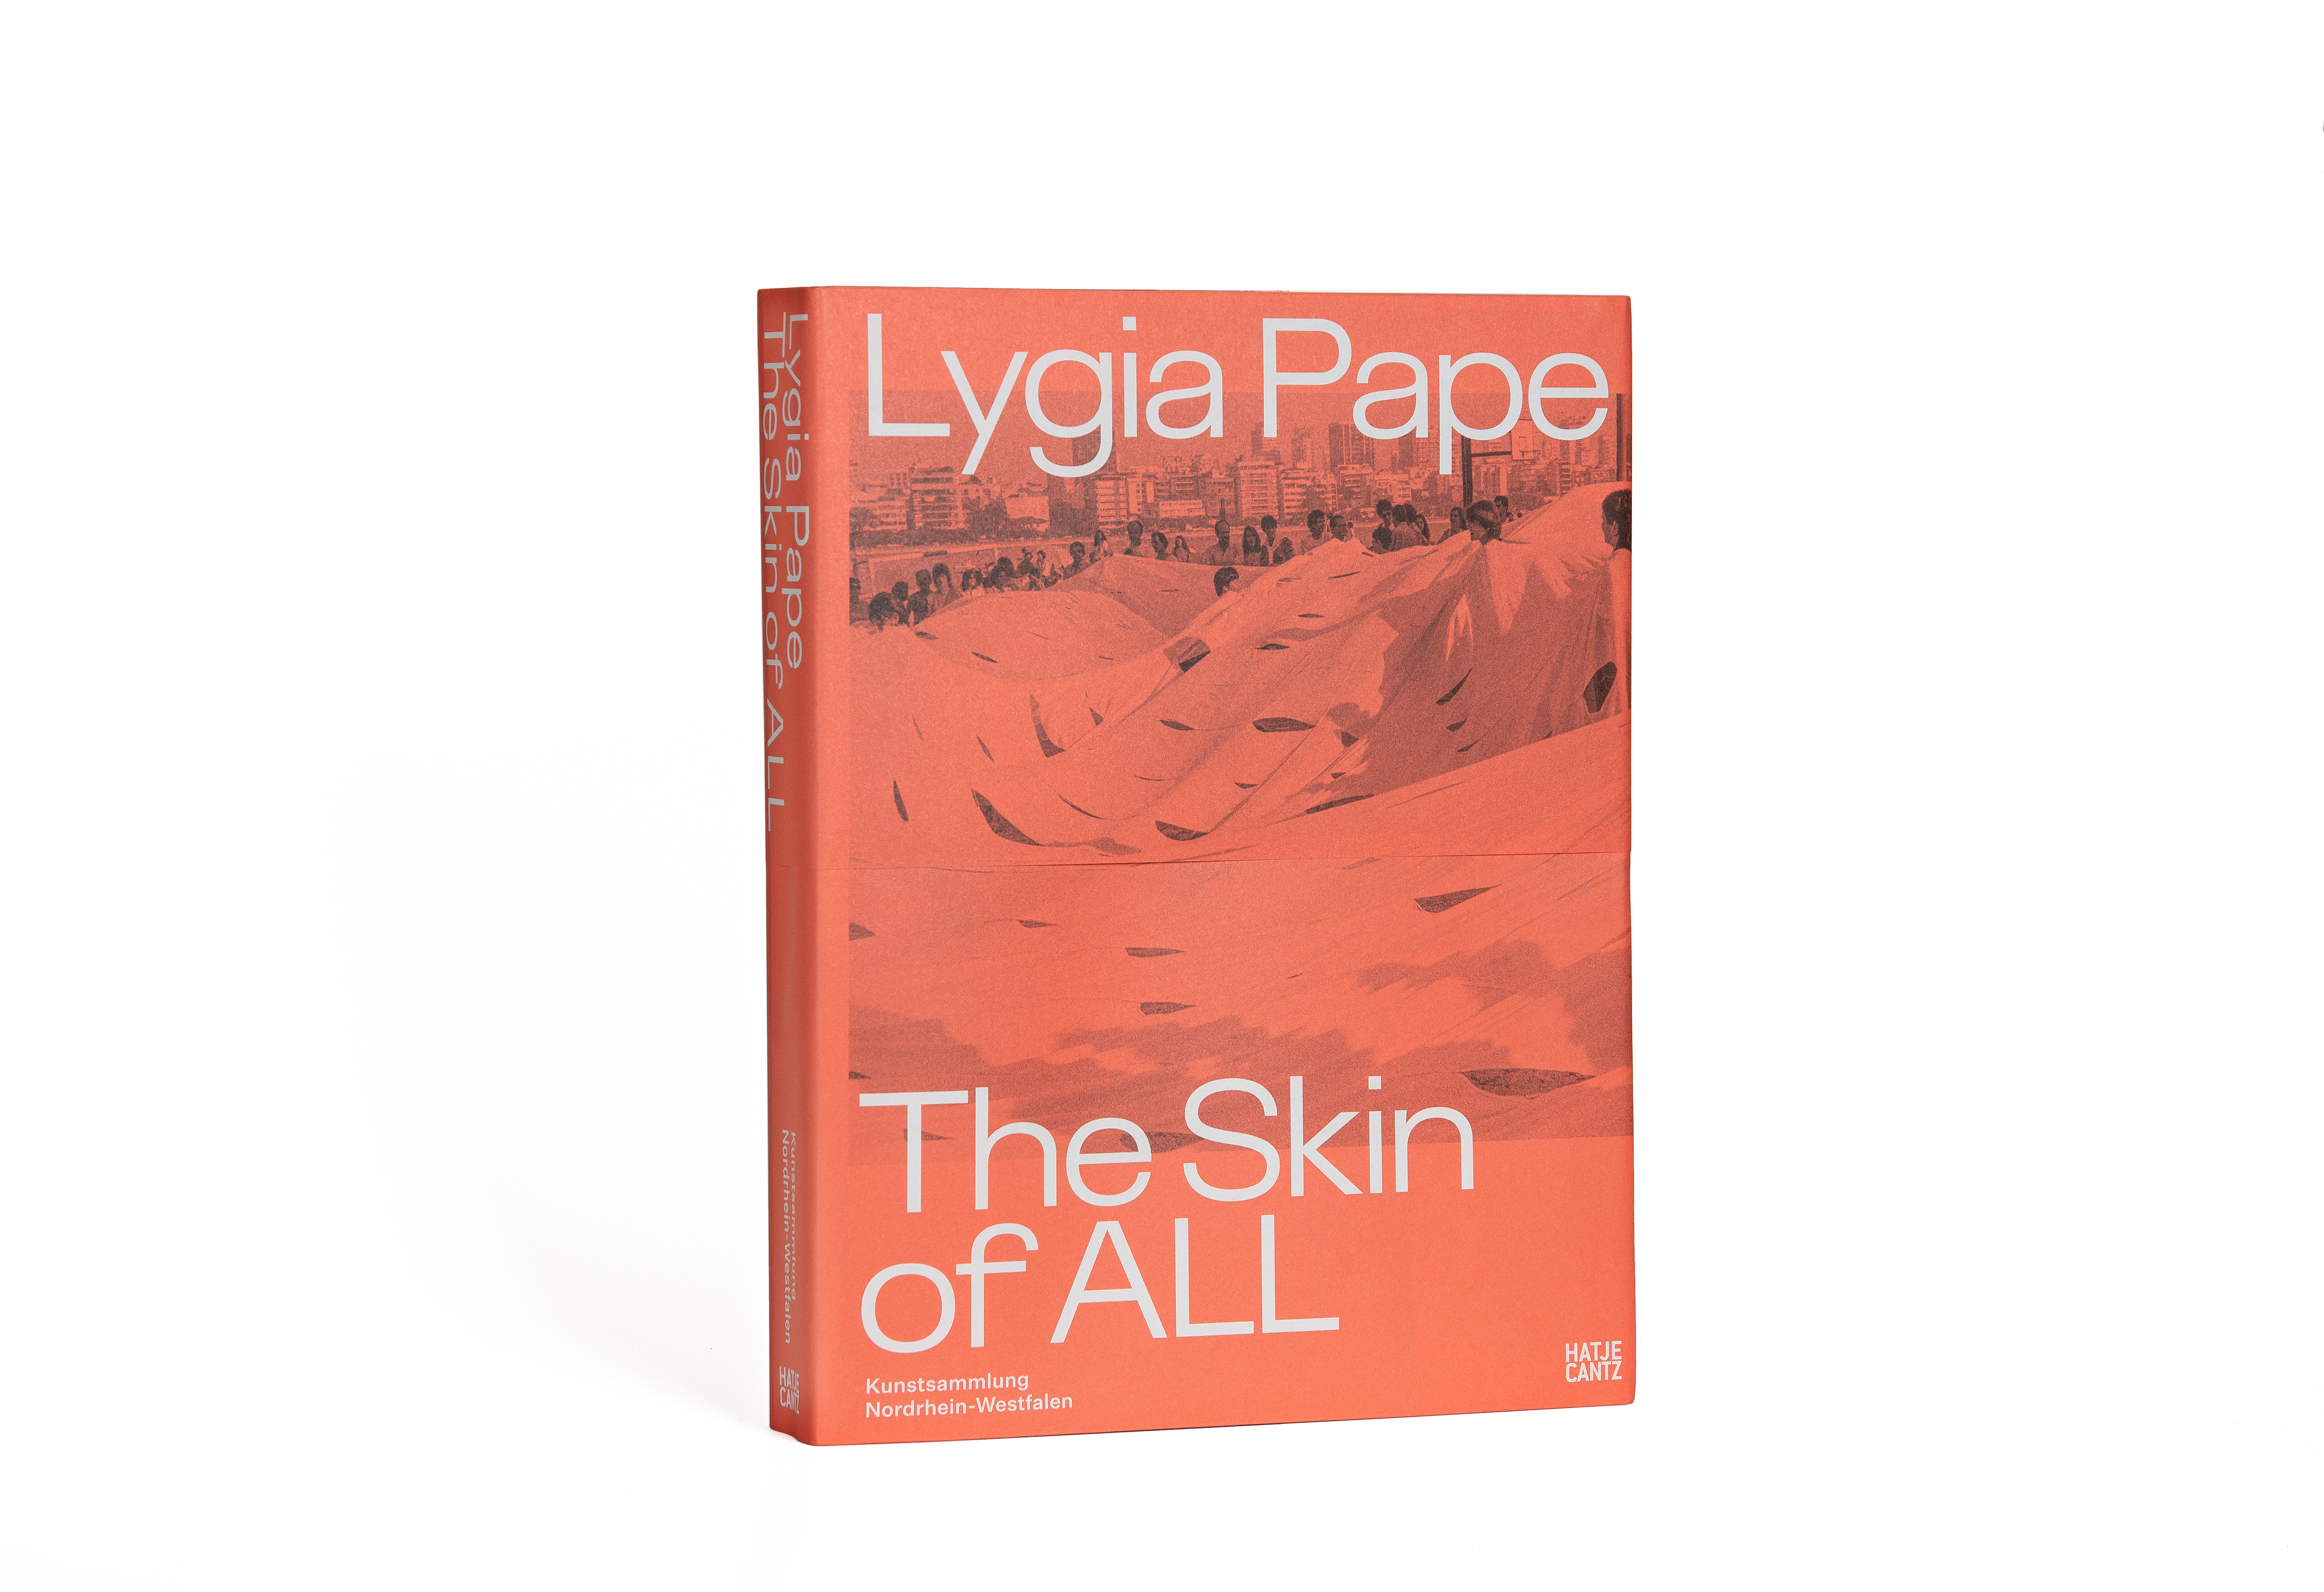 Lygia Pape. The Skin of ALL